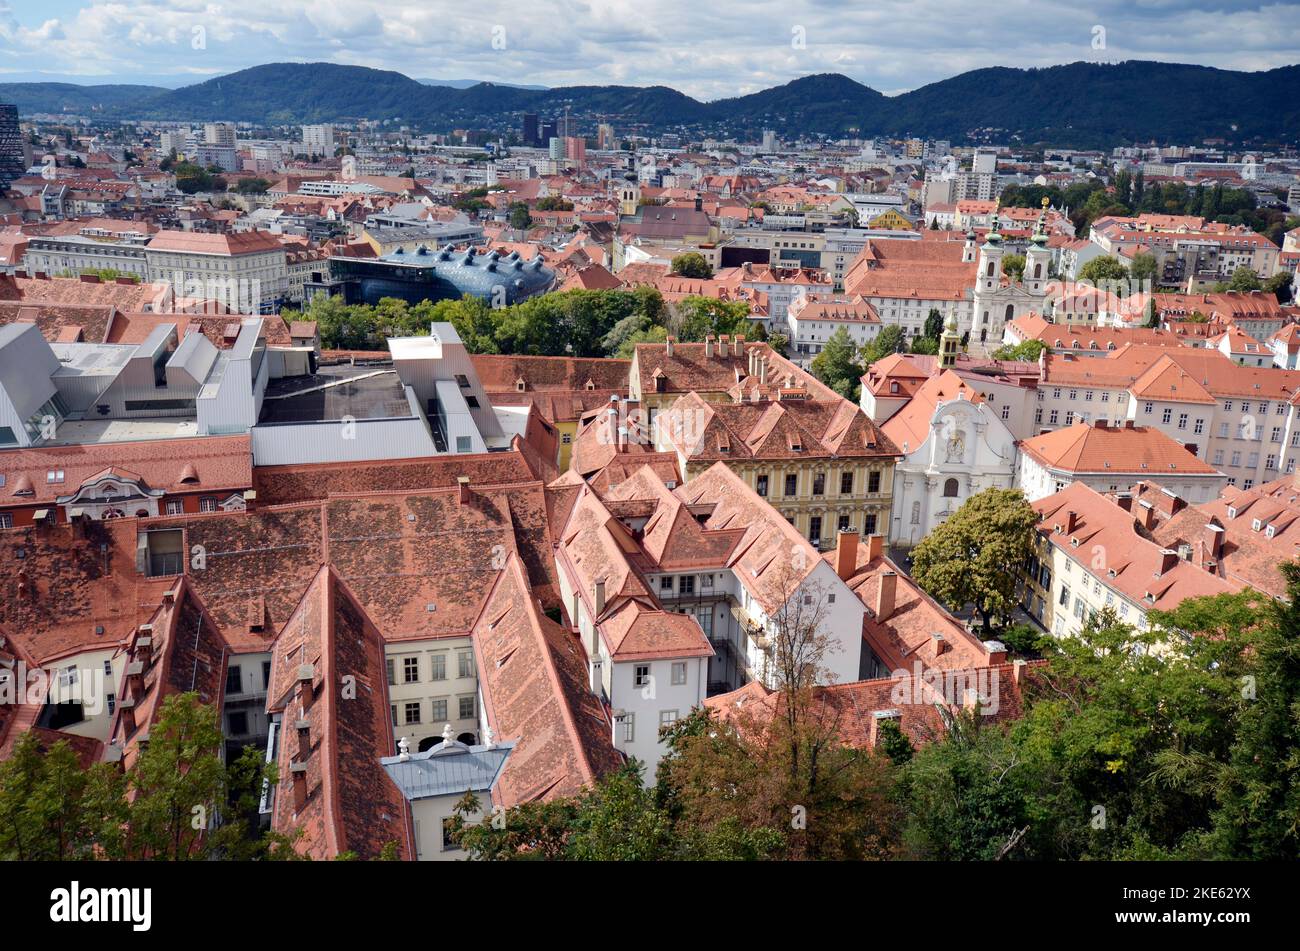 Austria, aerial view over the UNESCO world heritage site city of Graz, capital of Styria with Kunsthaus, an exhibition building and new architectural Stock Photo